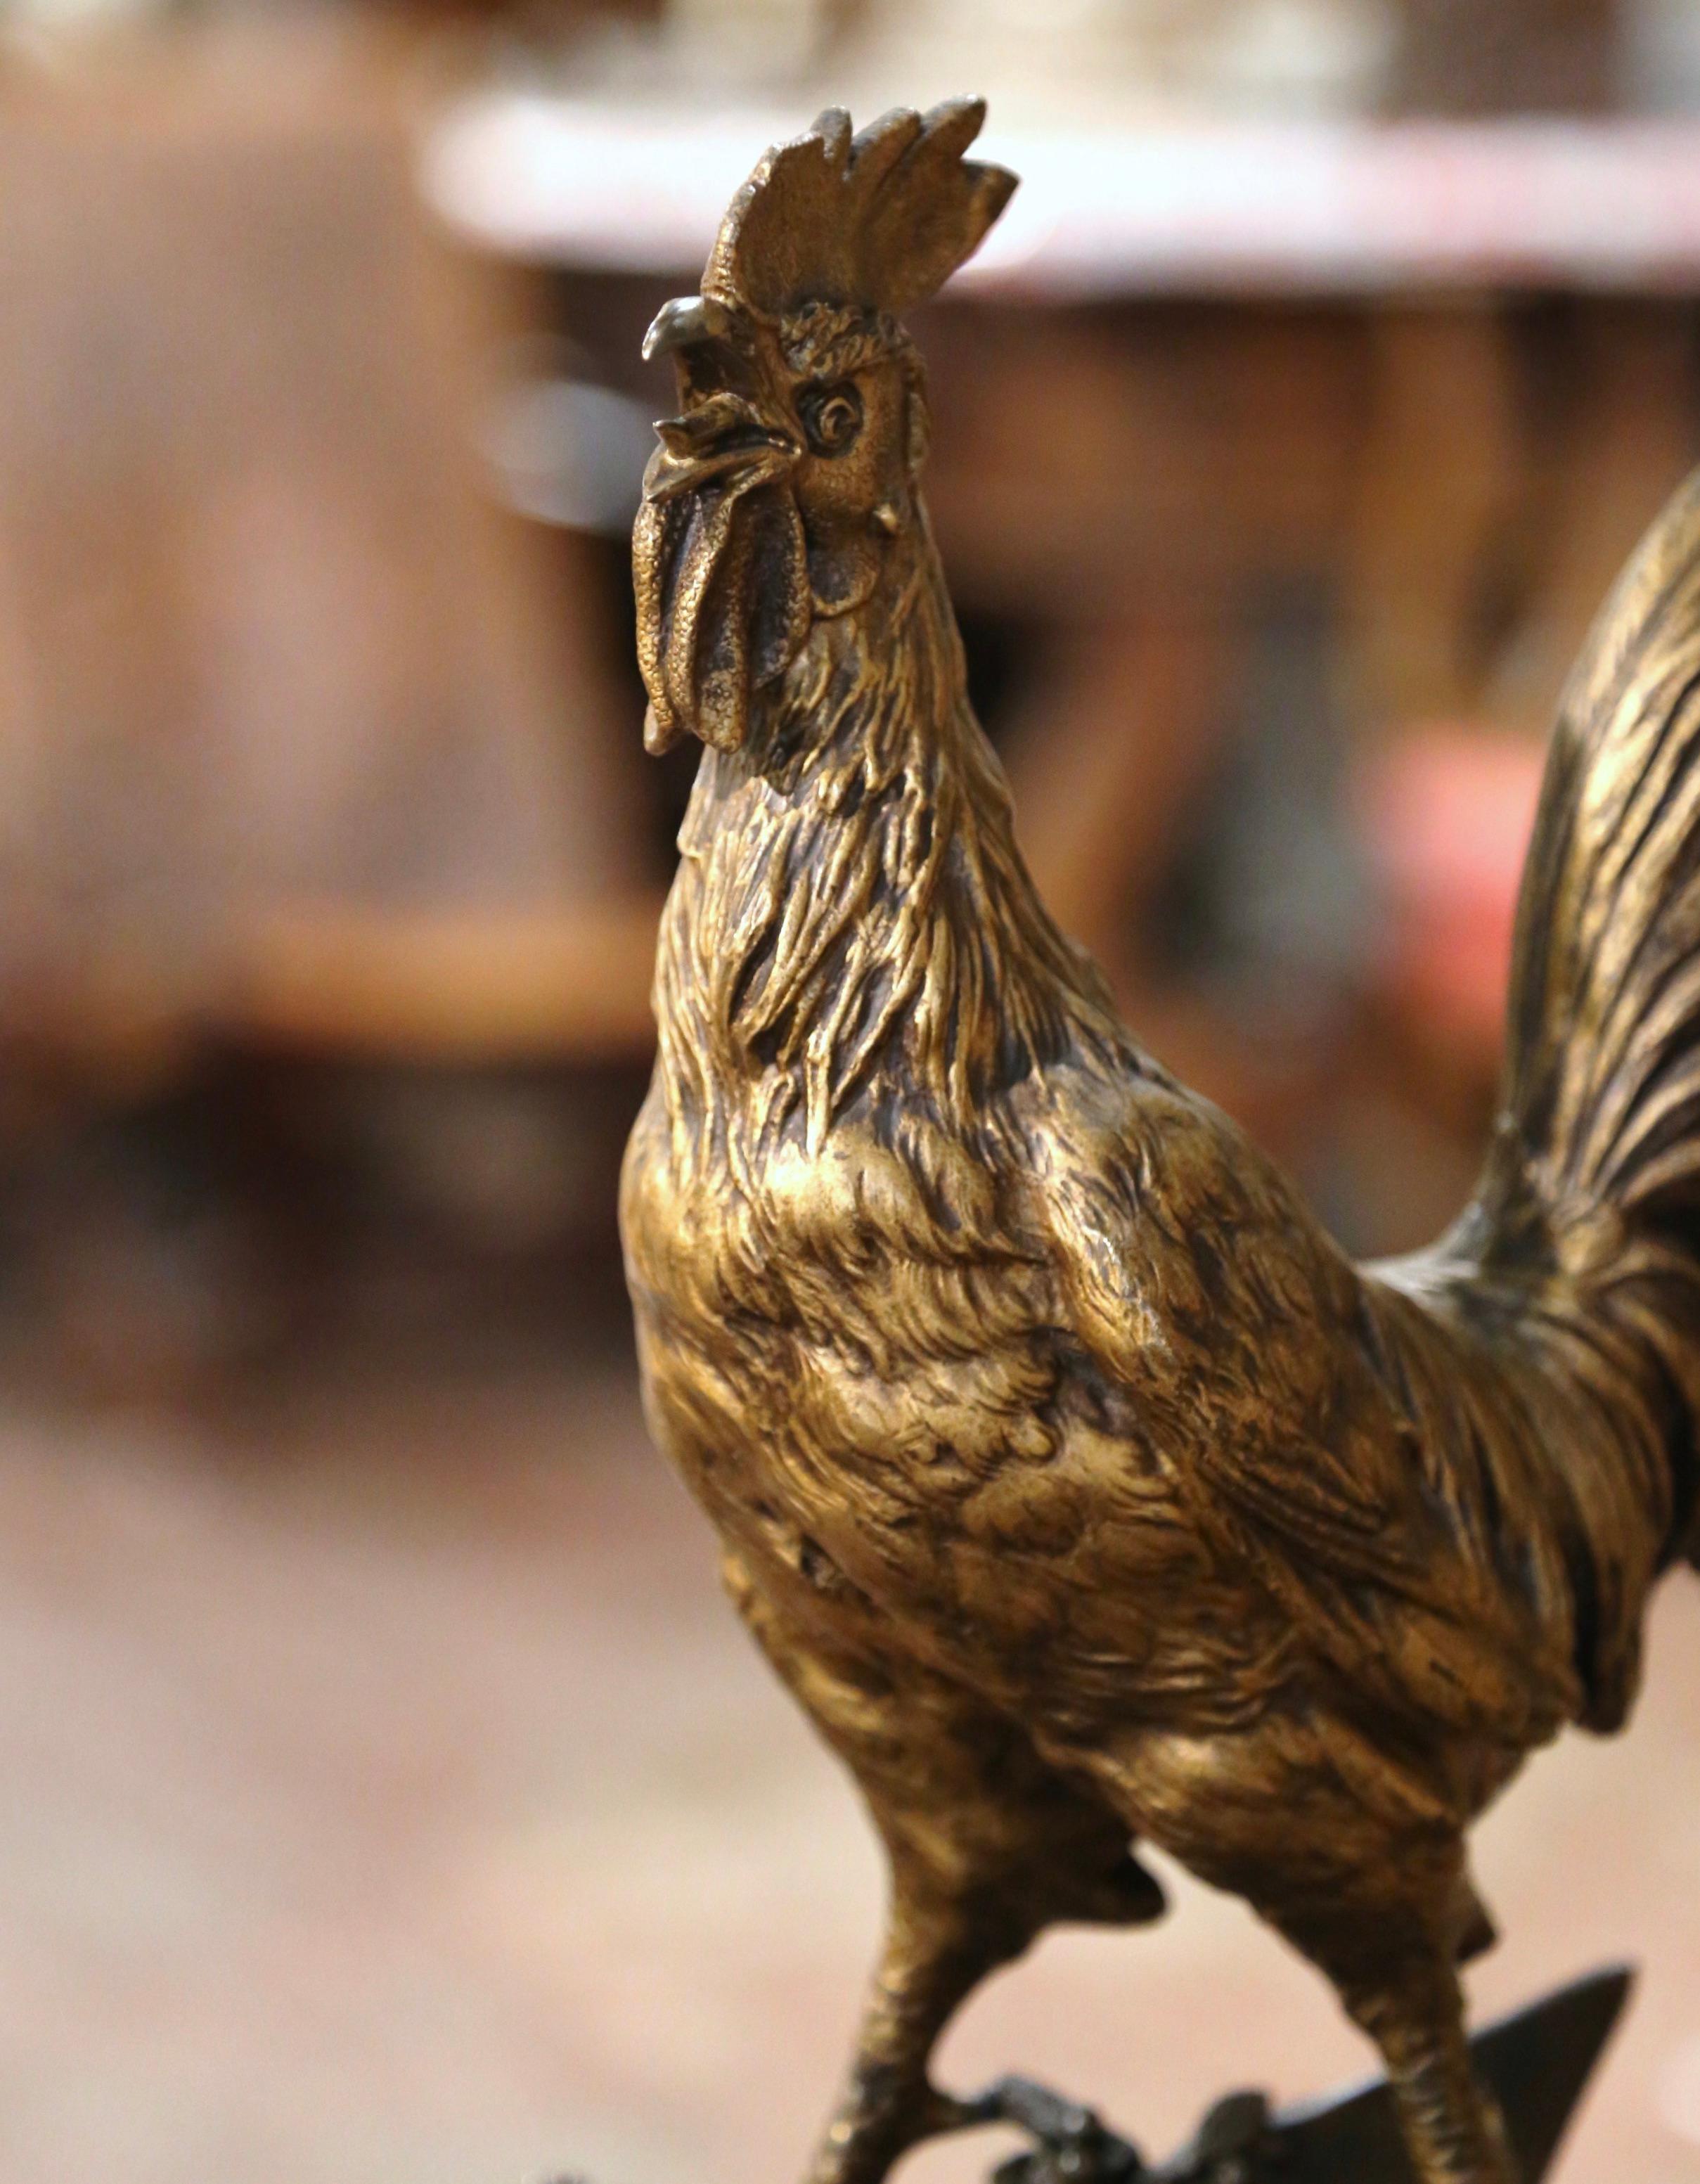 Decorate an office or a study with this lovely antique rooster figure. Sculpted in France circa 1880, and a traditional symbol of France, the bronze chanticleer is signed by the artist E. Drouot. The proud rooster is shown standing on a rocky base